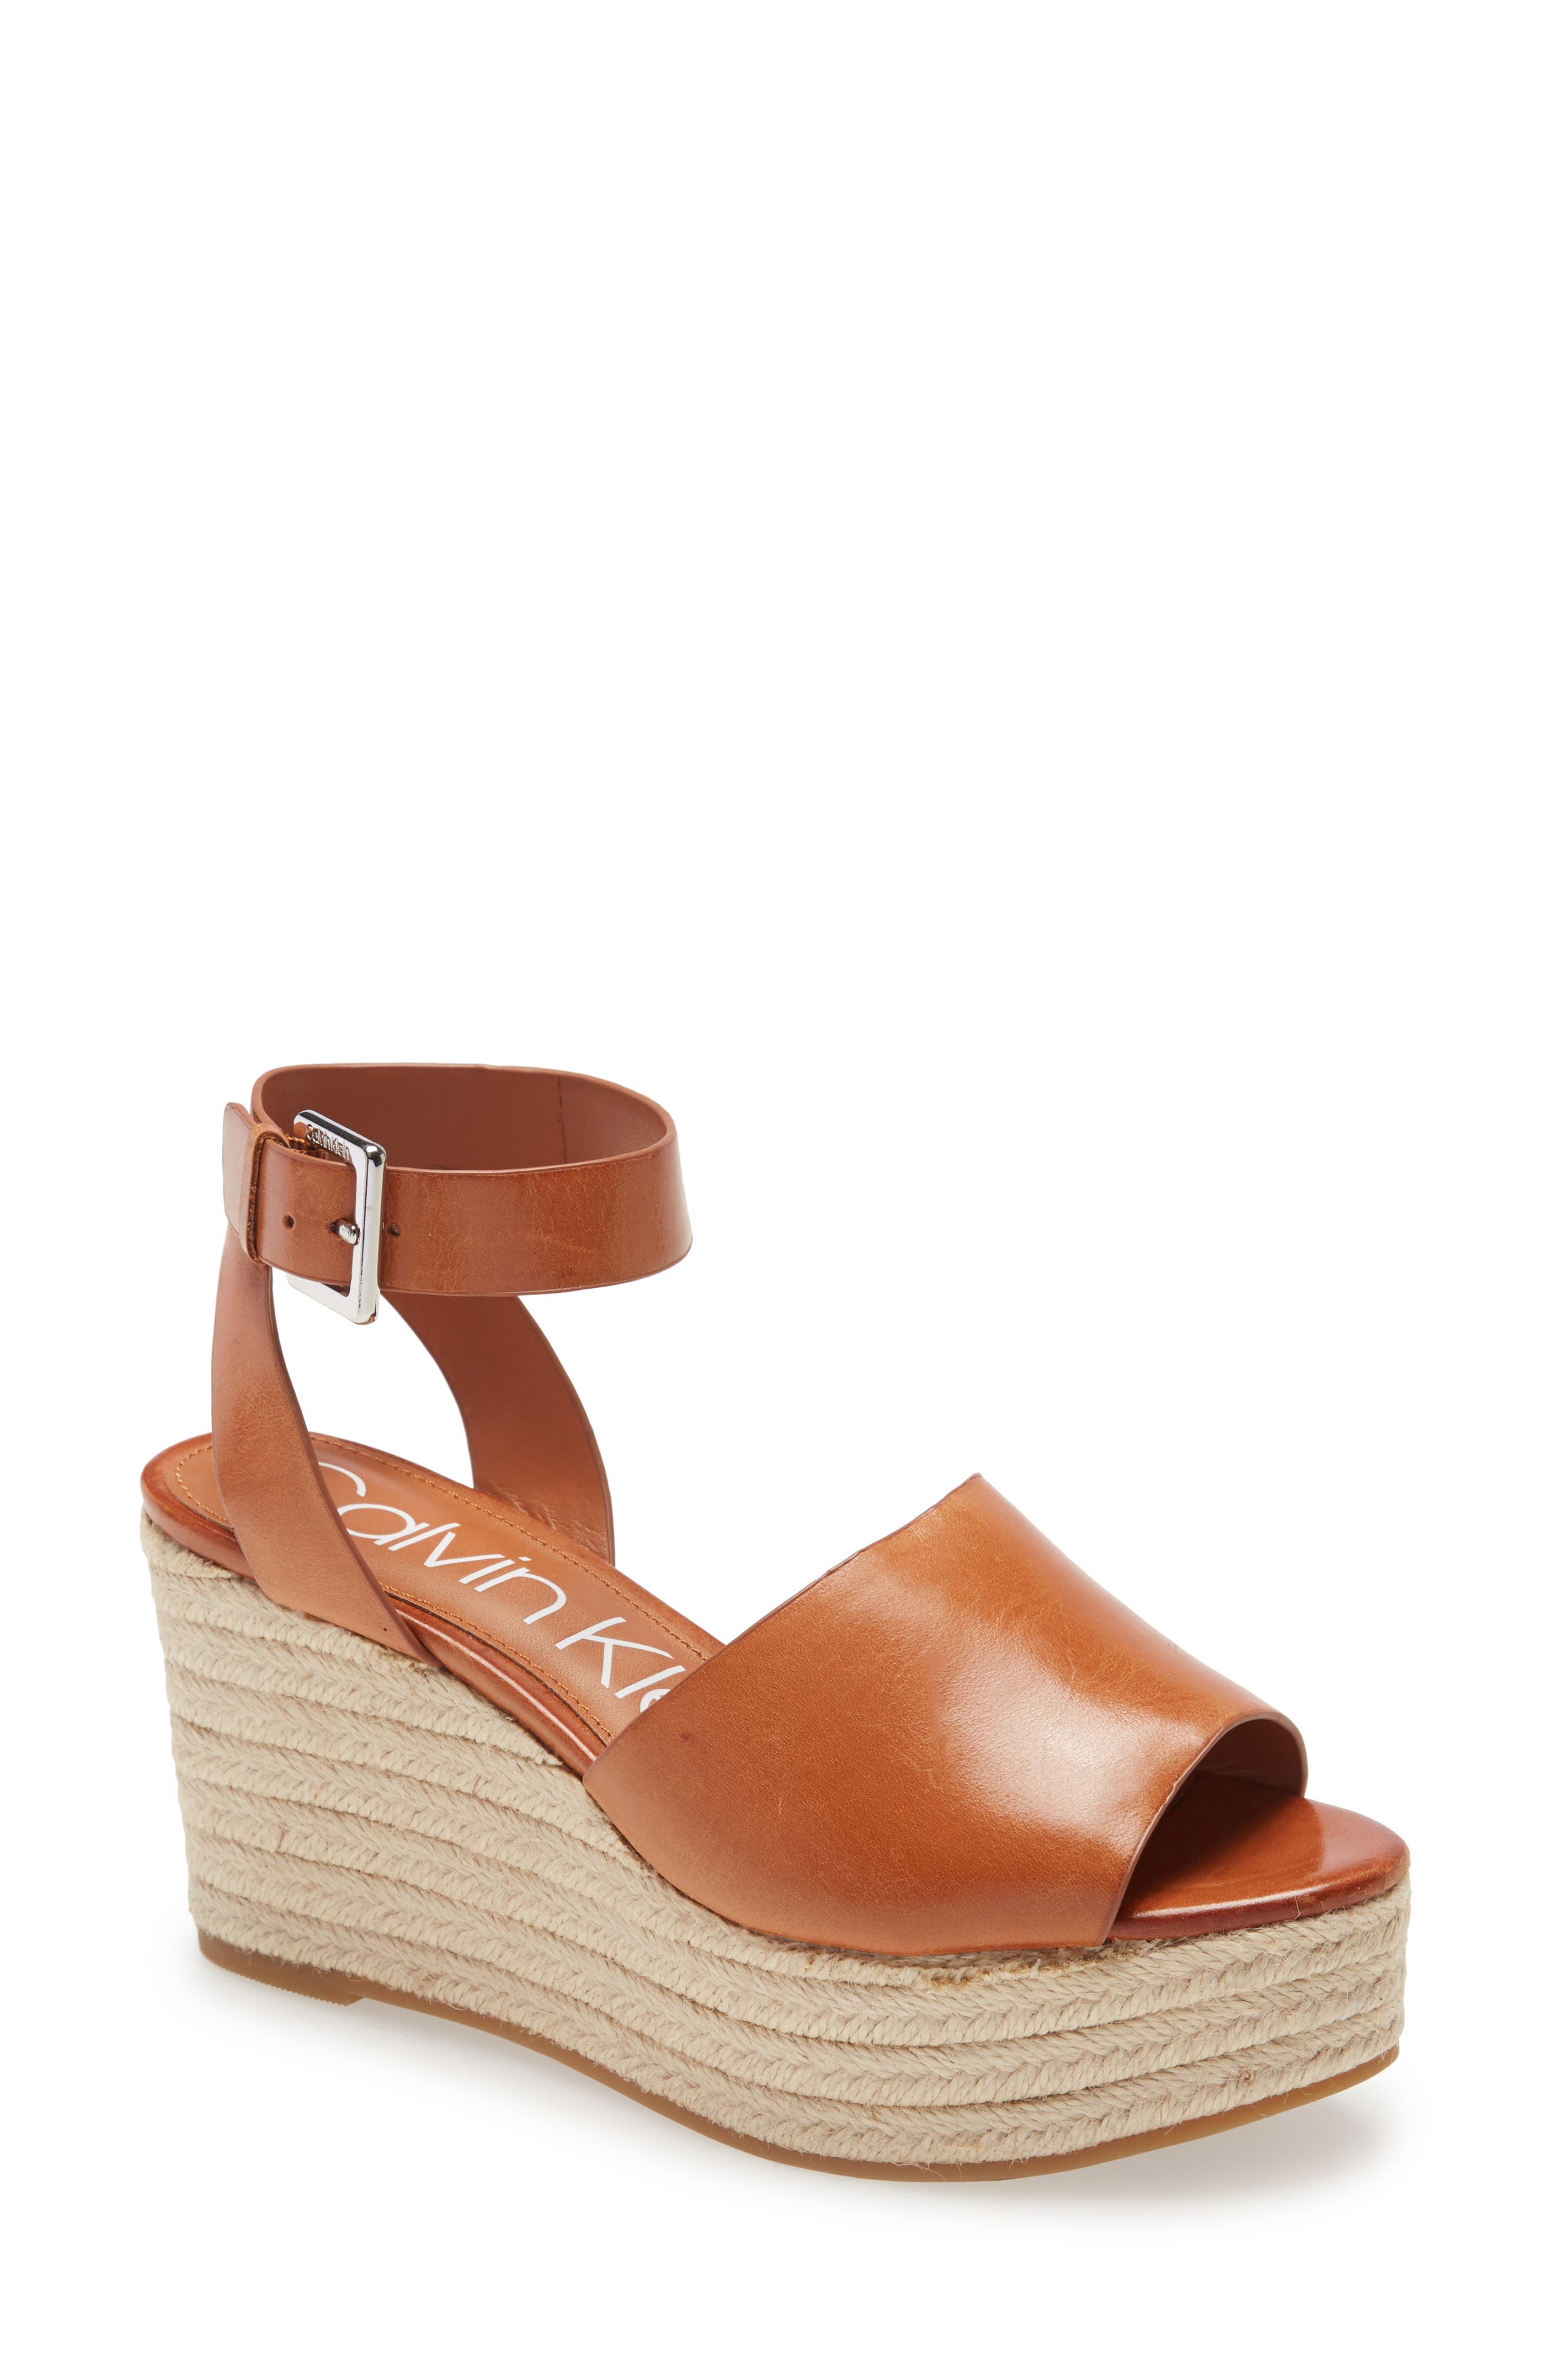 nordstrom shoes wedges